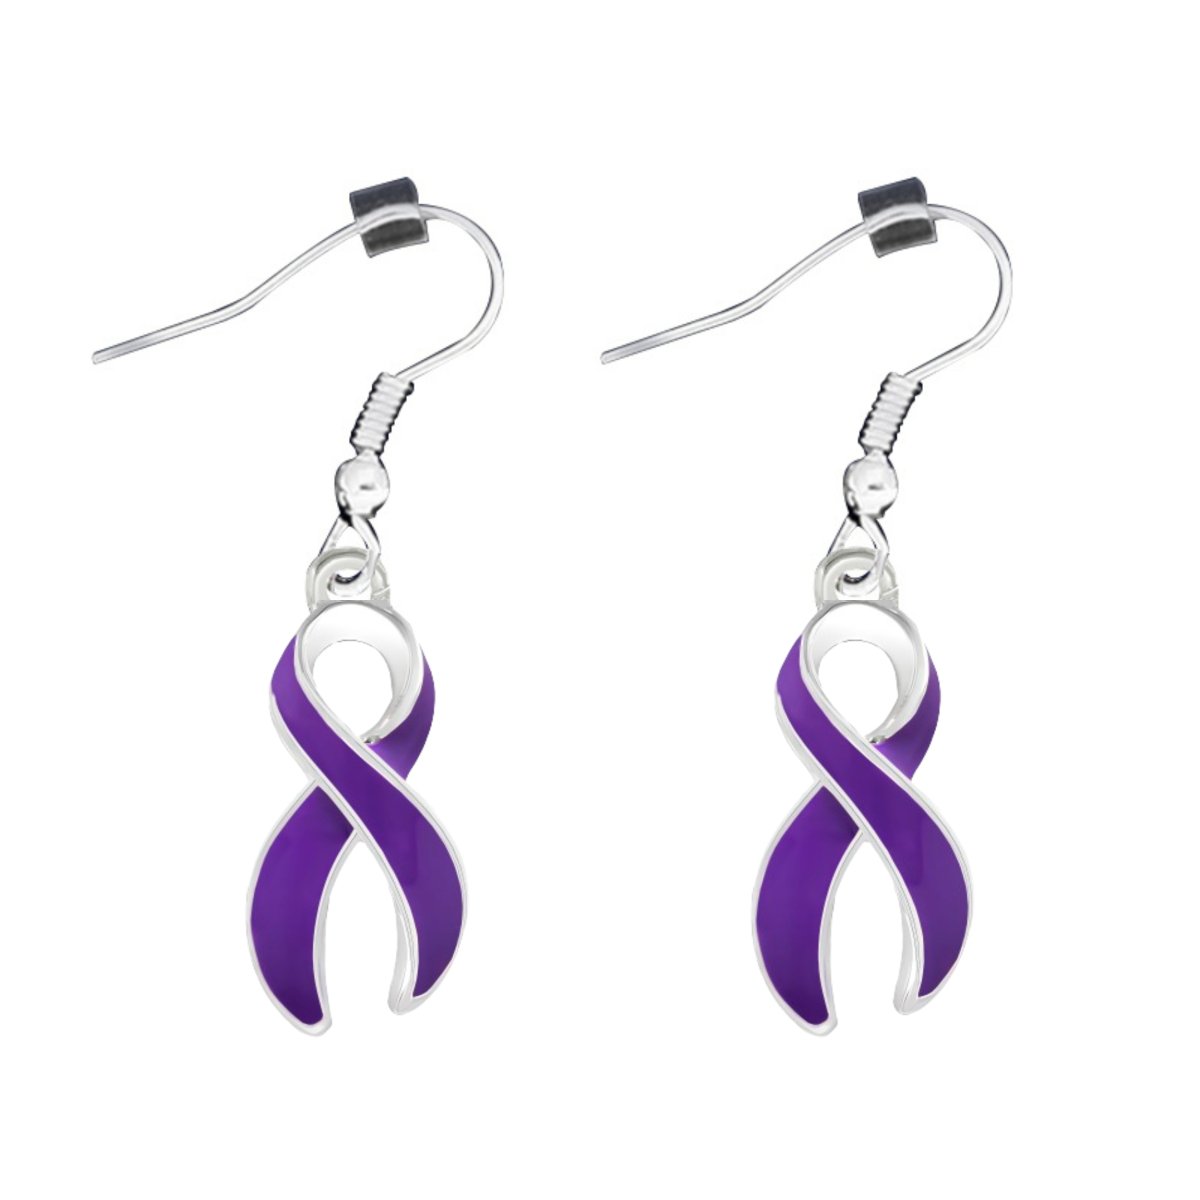 Large Purple Ribbon Awareness Hanging Earrings - Fundraising For A Cause